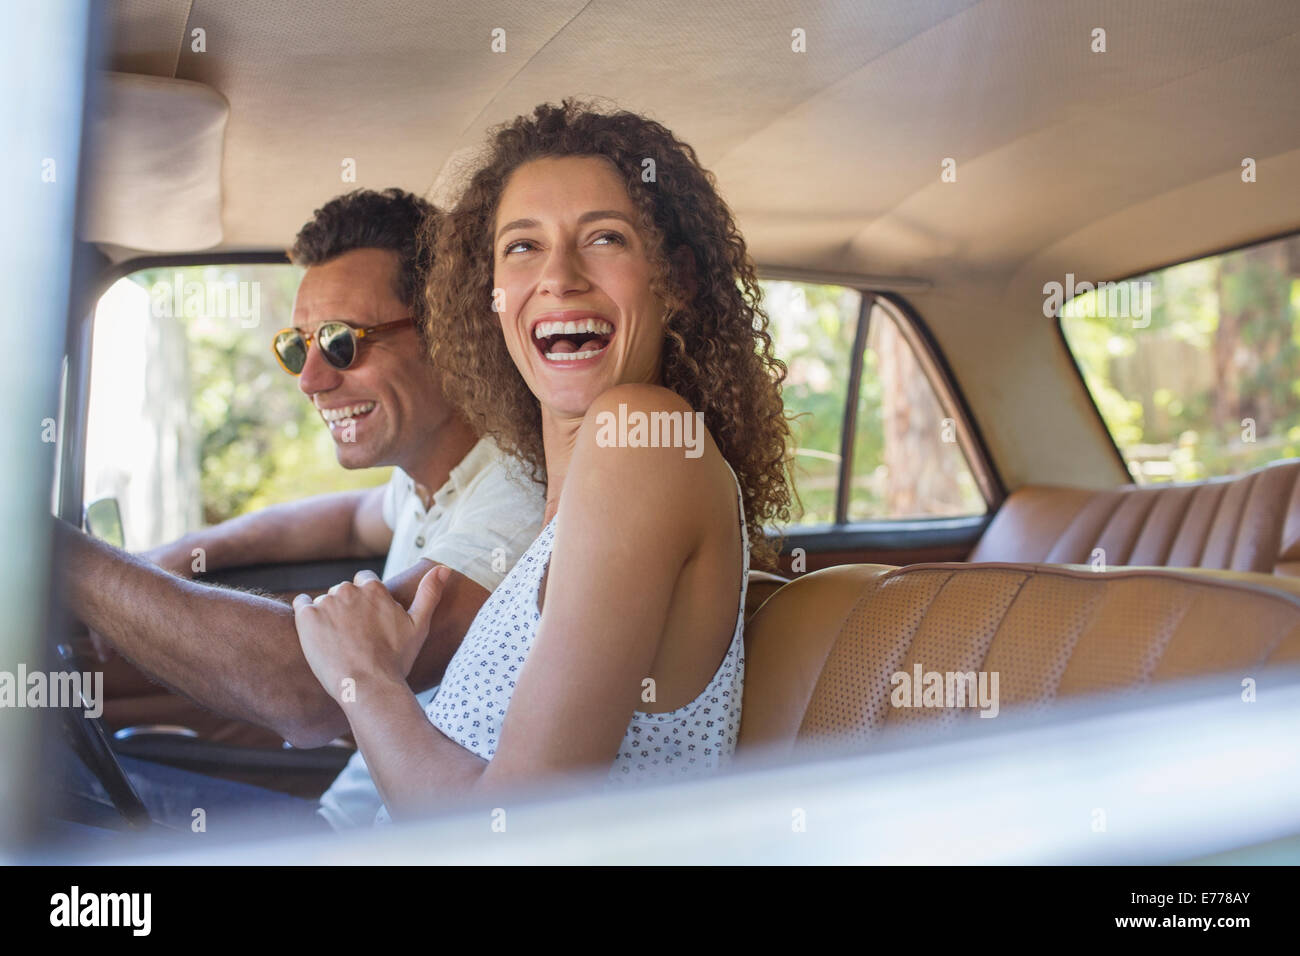 Couple laughing during car ride Stock Photo